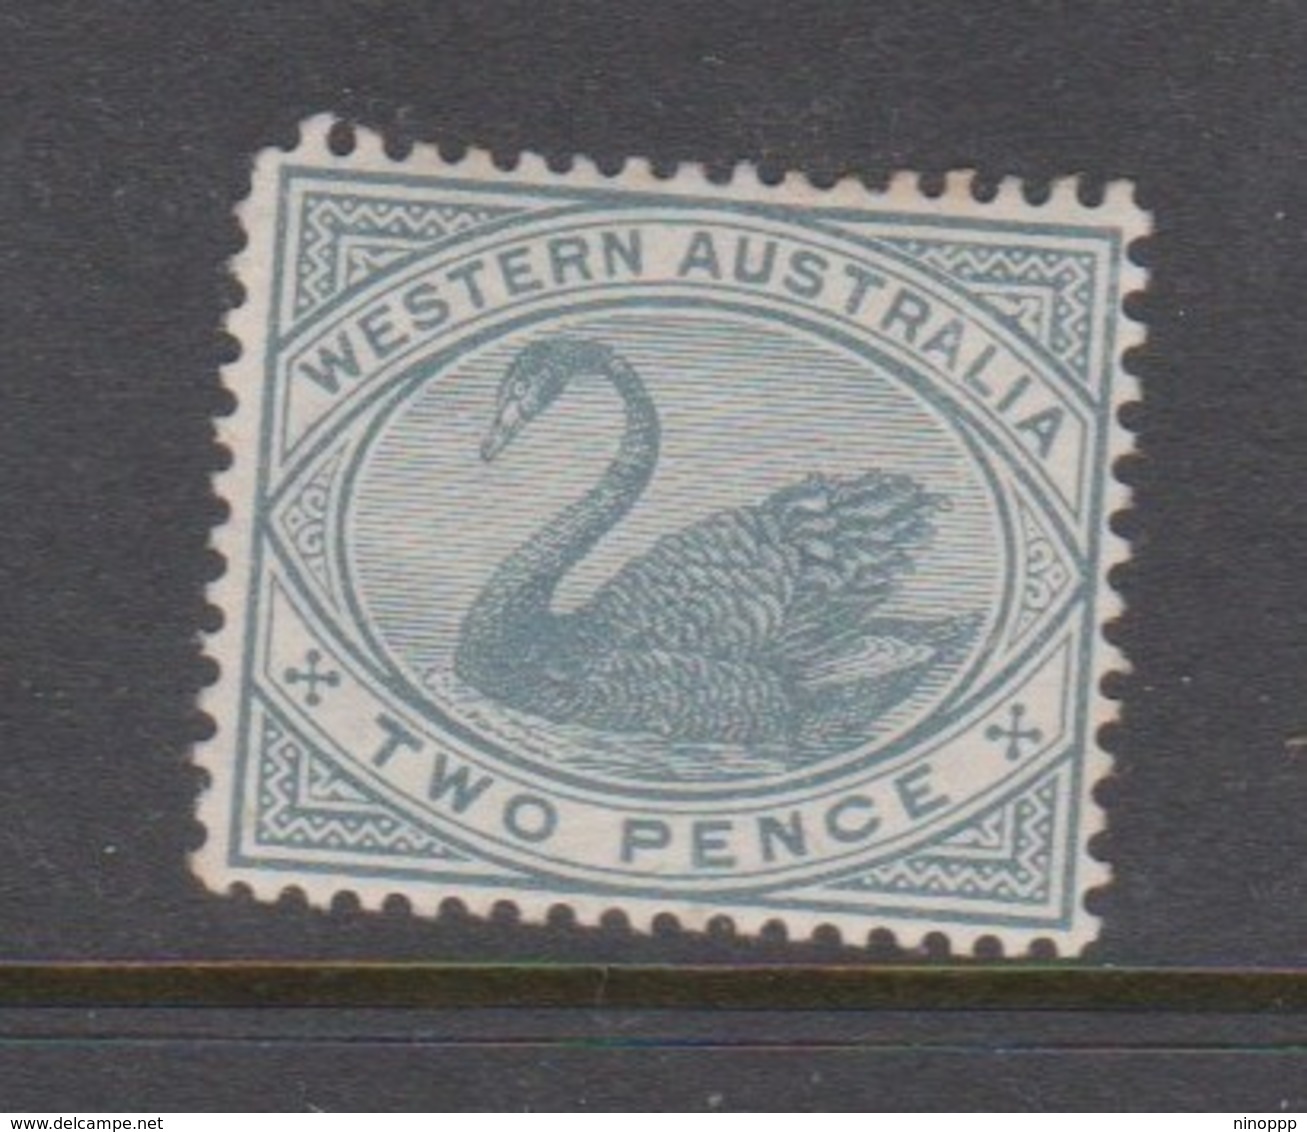 Australia-Western Australia SG 96 1885-93 Two Pence Bluish Grey ,perf 14,mint Hinged - Mint Stamps